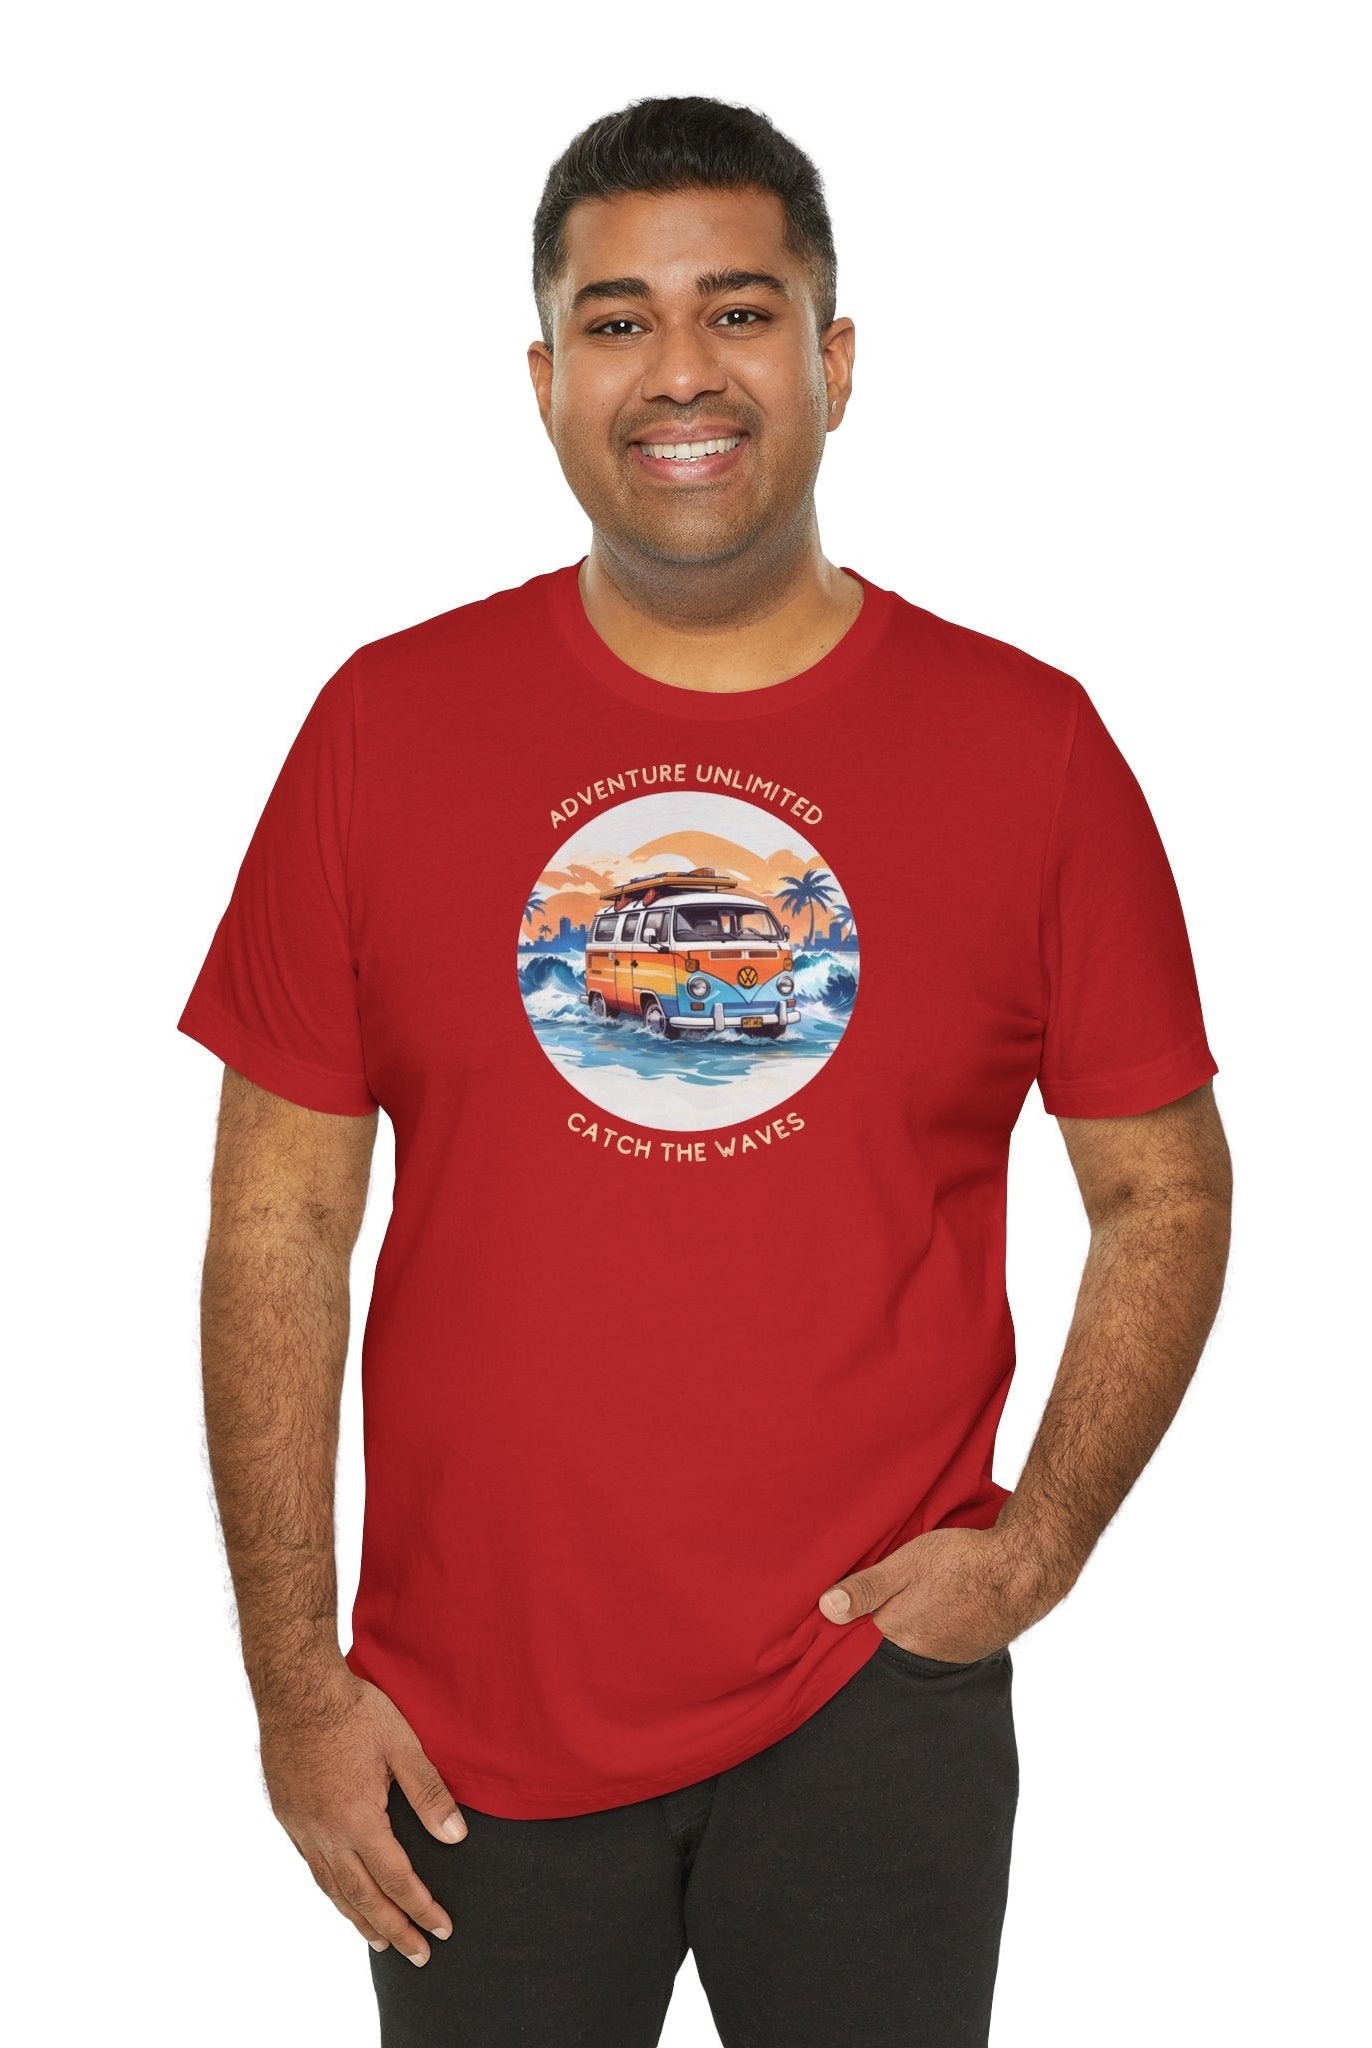 Man wearing red direct-to-garment printed t-shirt with quote ’on it’ from Adventure Unlimited Soulshinecreators